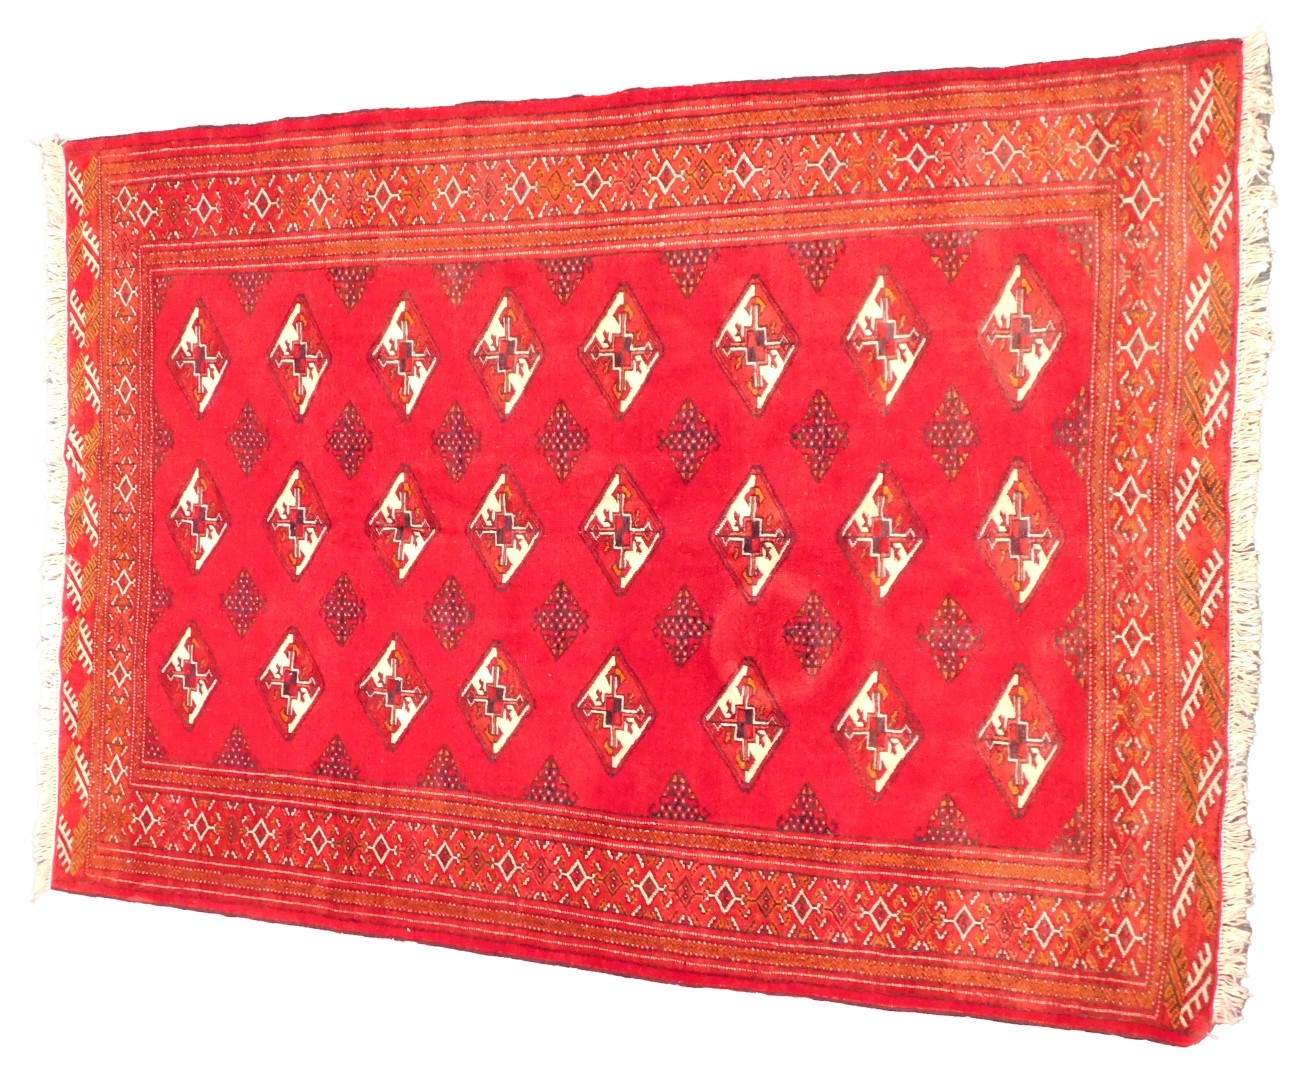 A Turkoman rug, with a design of lozenges on a red ground, 106cm x 198cm.